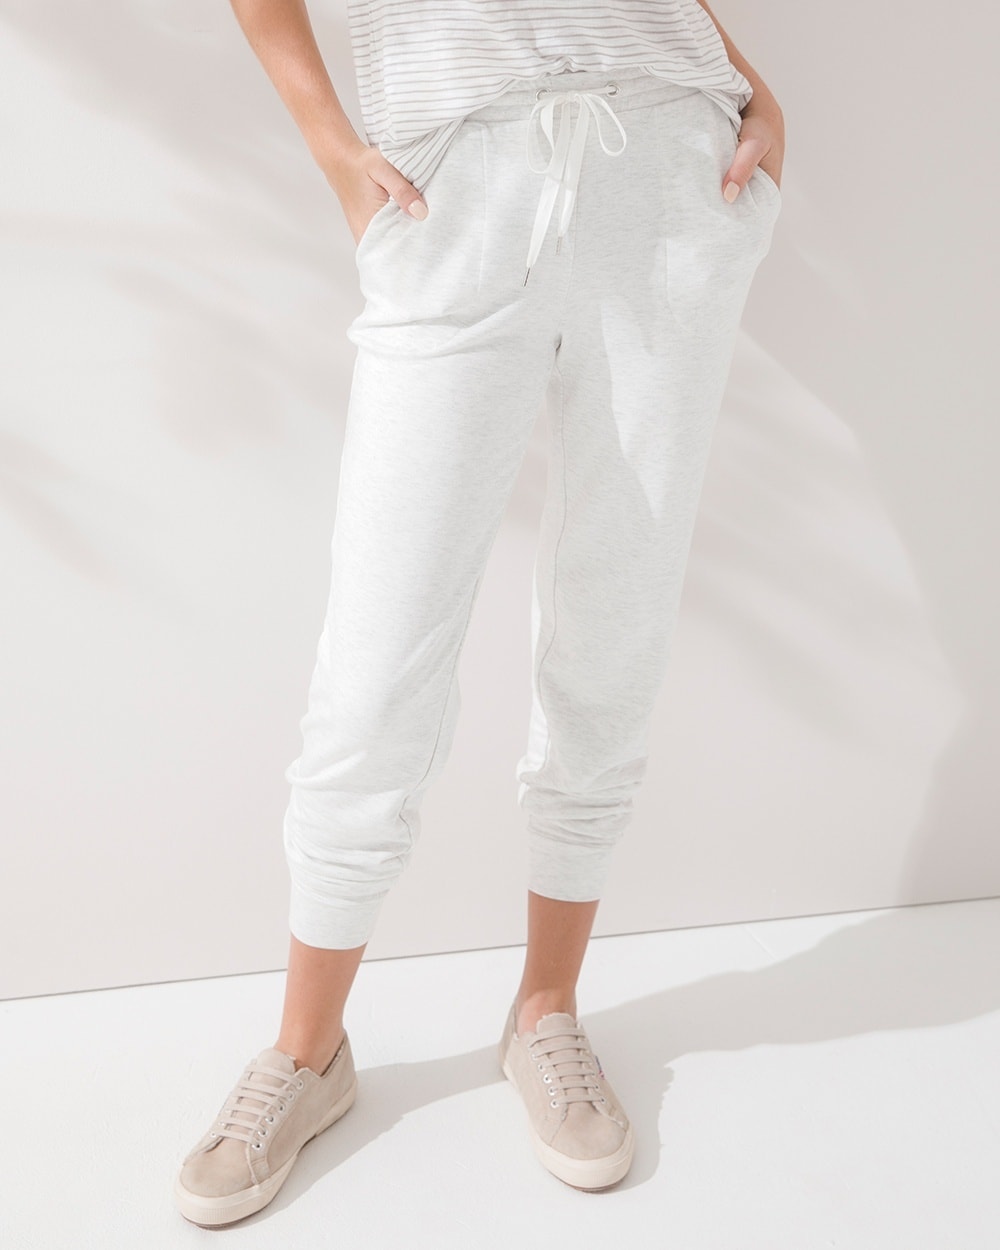 WKND Soft Brushed Terry Jogger